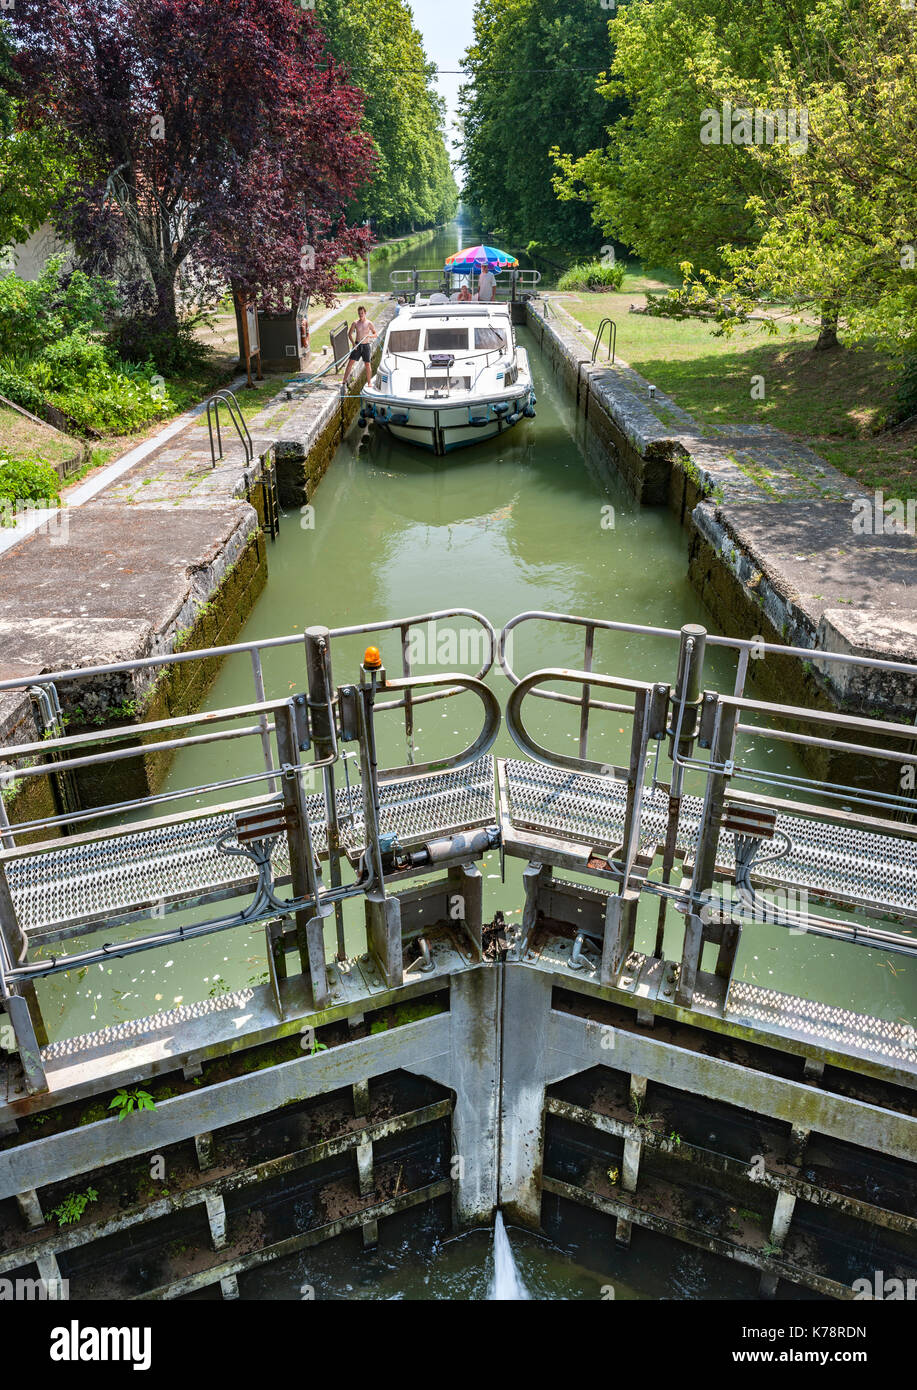 Canal boat navigating a lock on the canal latéral à la Garonne in the Dordogne region of southwest France. Stock Photo